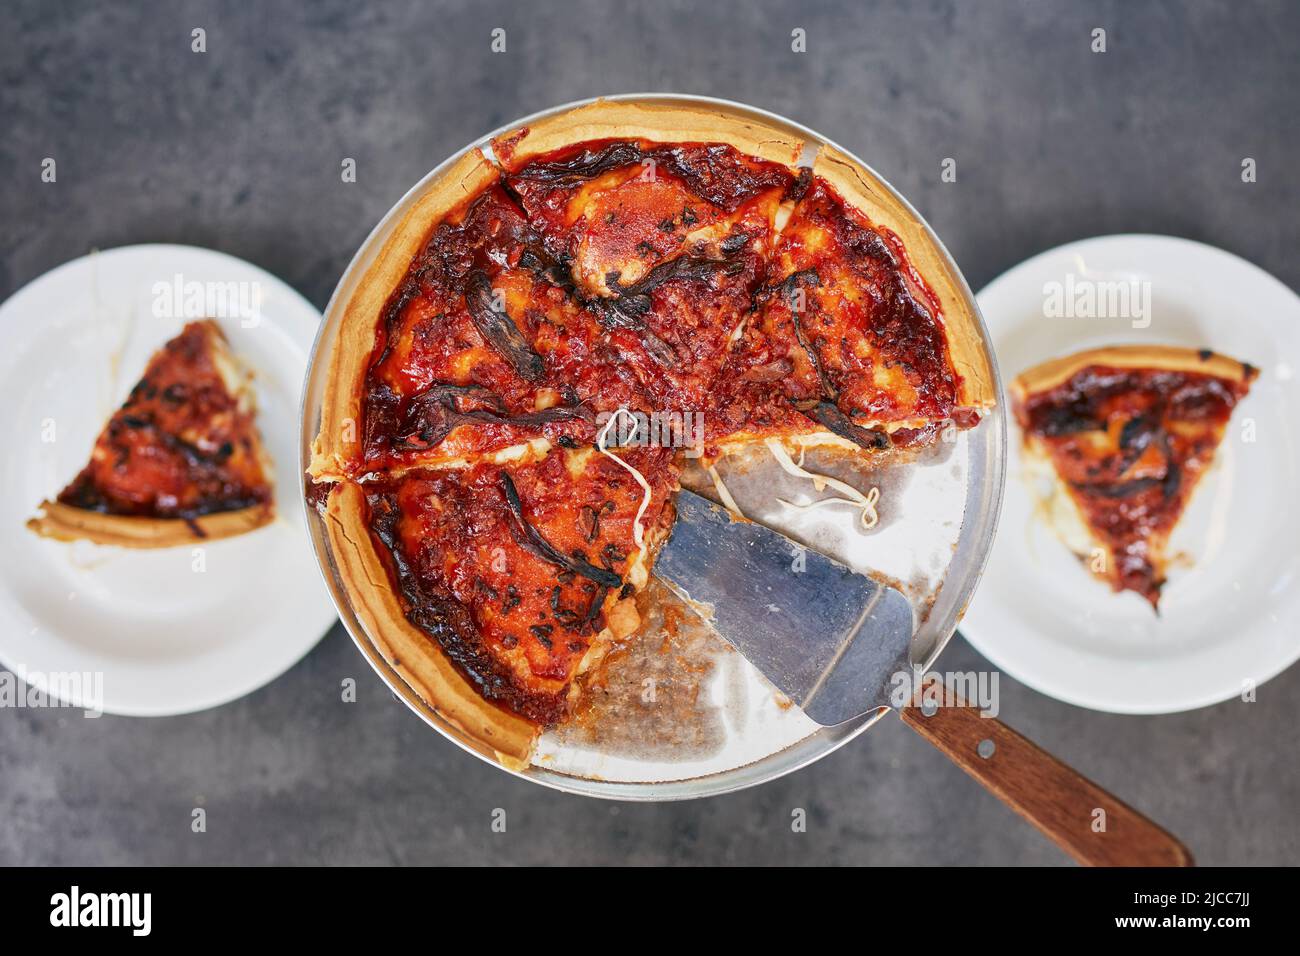 Deep dish pizza with tomato sauce for two person on table in restaurant. Stock Photo